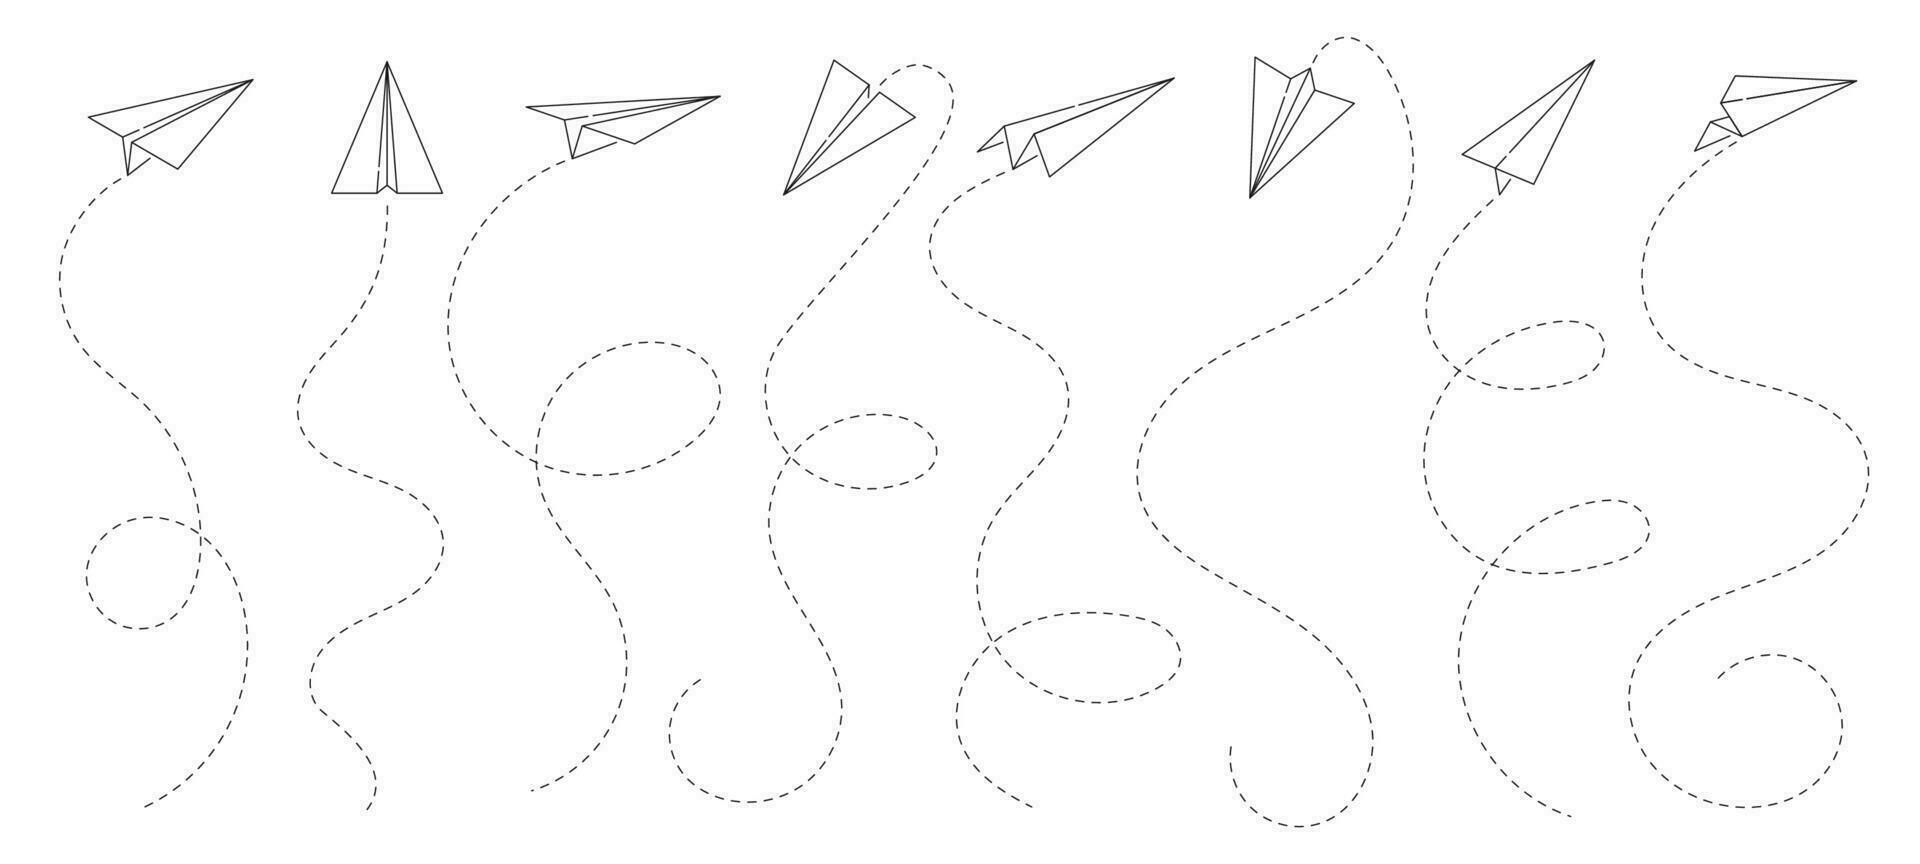 Paper aeroplane lines, freedom and idea concept vector